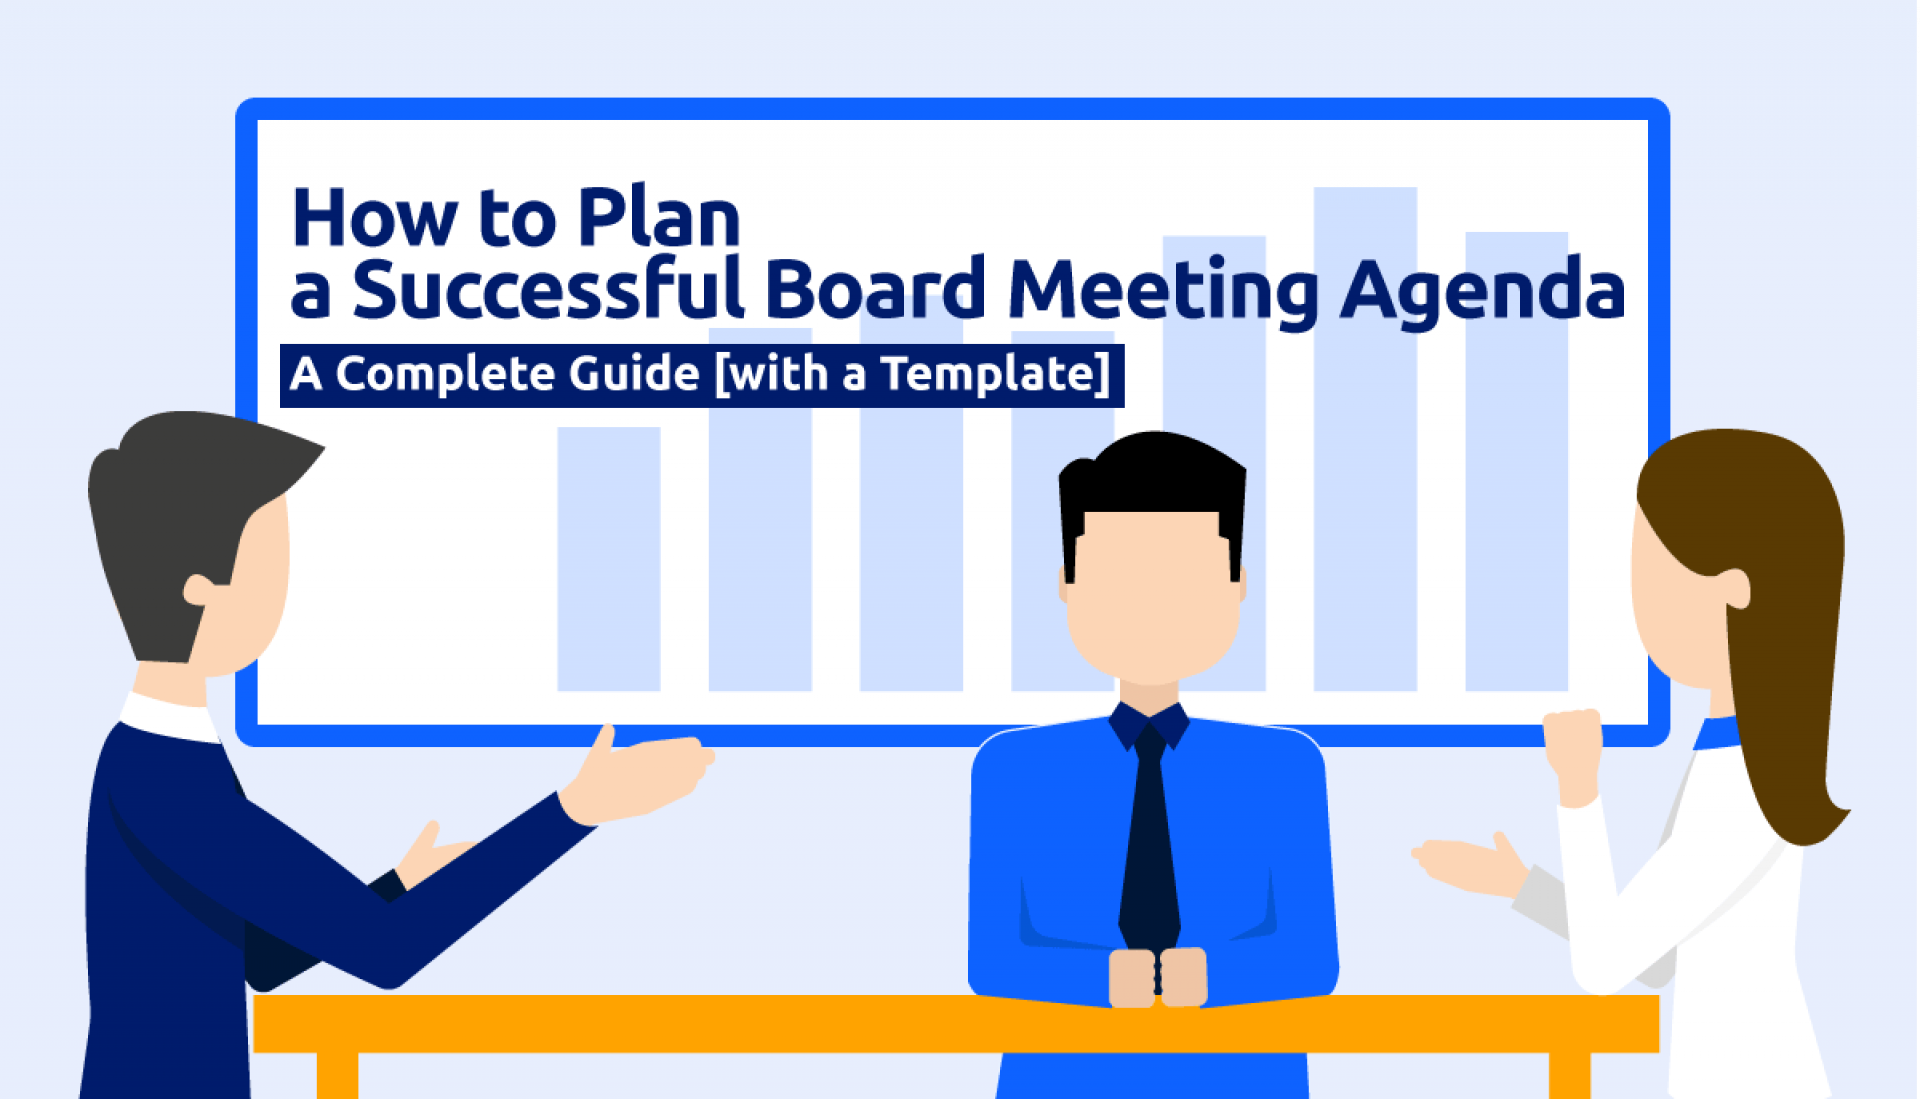 How to Plan a Successful Board Meeting Agenda: A Complete Guide [With a Template]